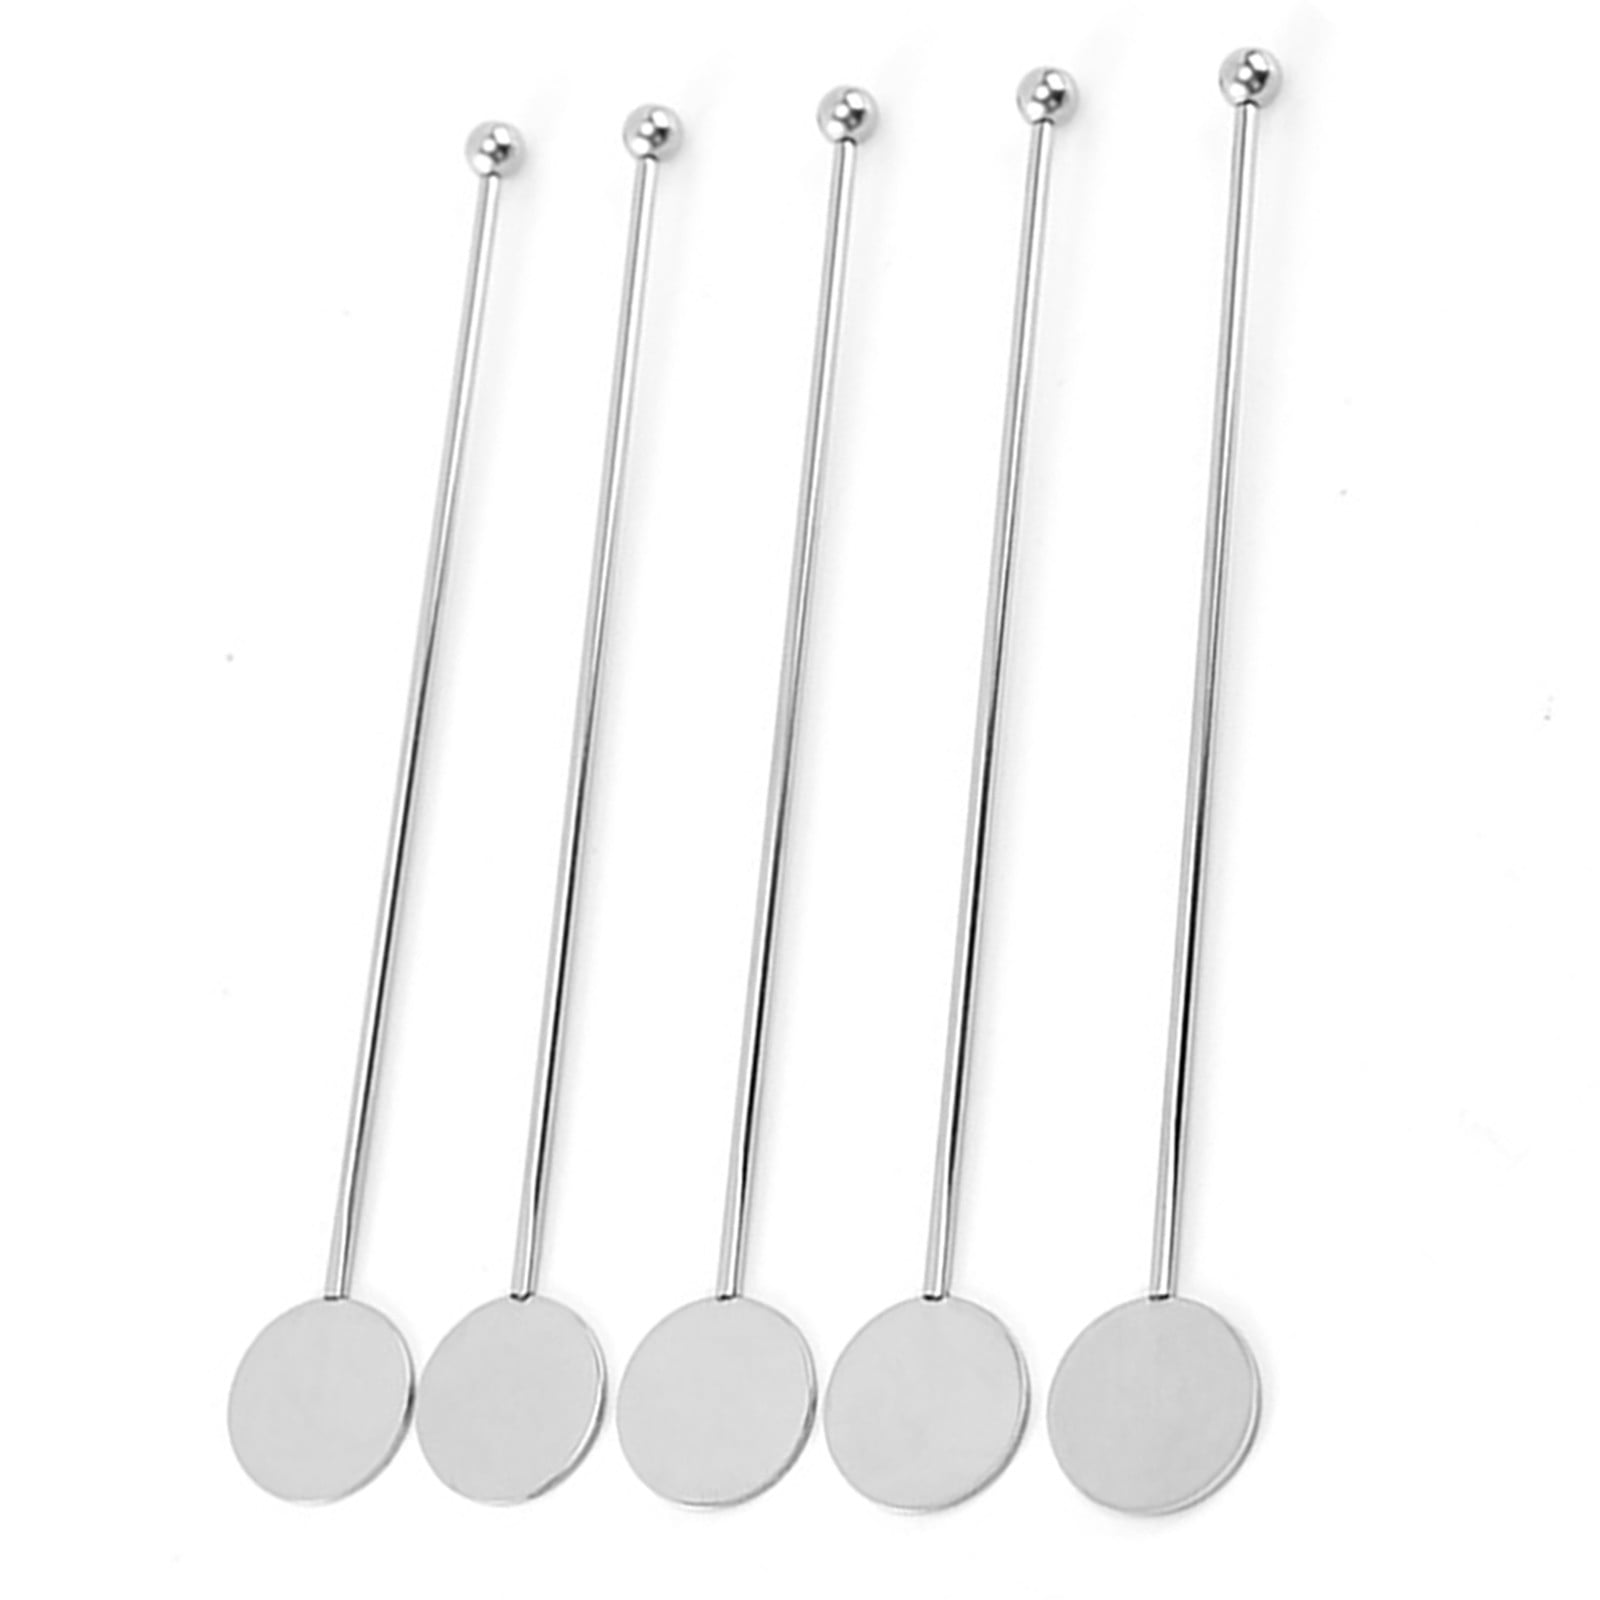 Csdtylh 15pcs Stainless Steel Coffee Beverage Stirrers Stir Cocktail Drink Swizzle Stick with Small Rectangular Paddles